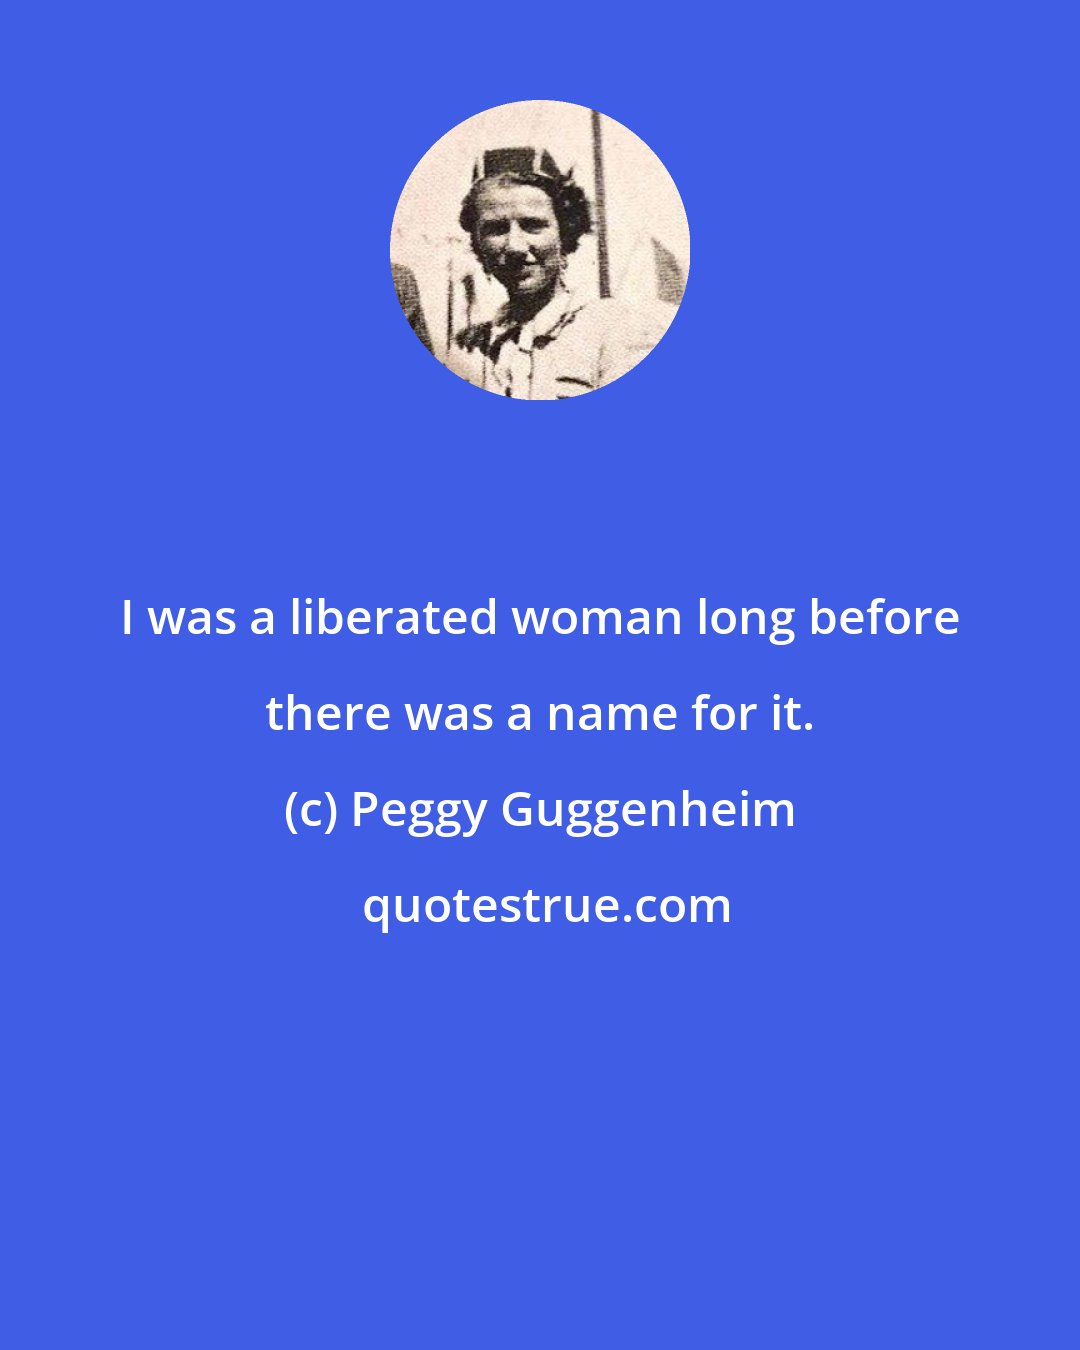 Peggy Guggenheim: I was a liberated woman long before there was a name for it.